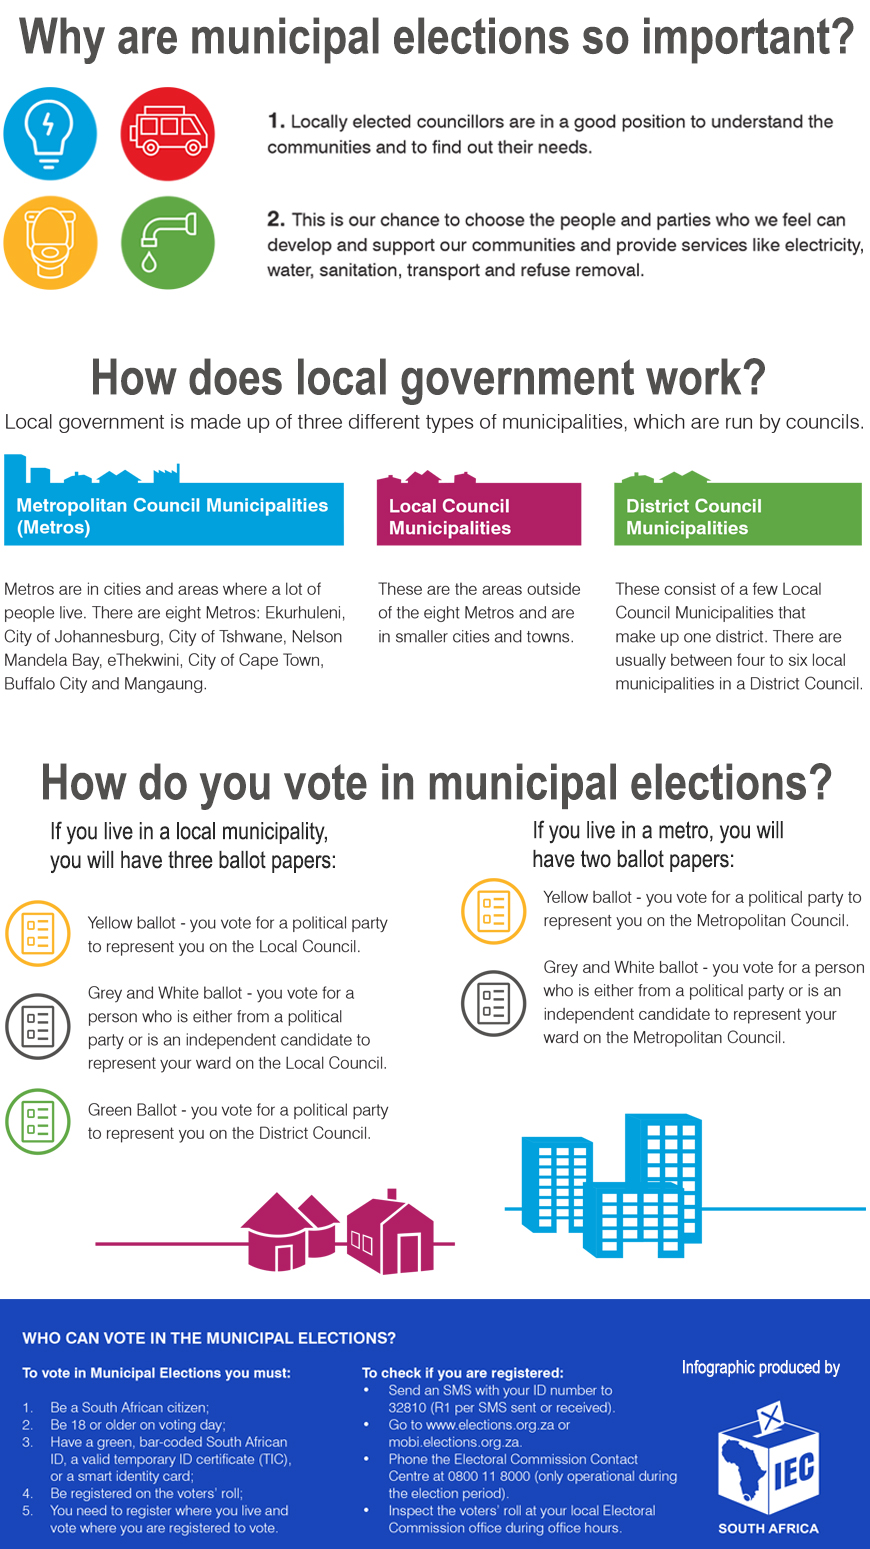 Know your elections. An infographic by the Independent Electoral Commission.